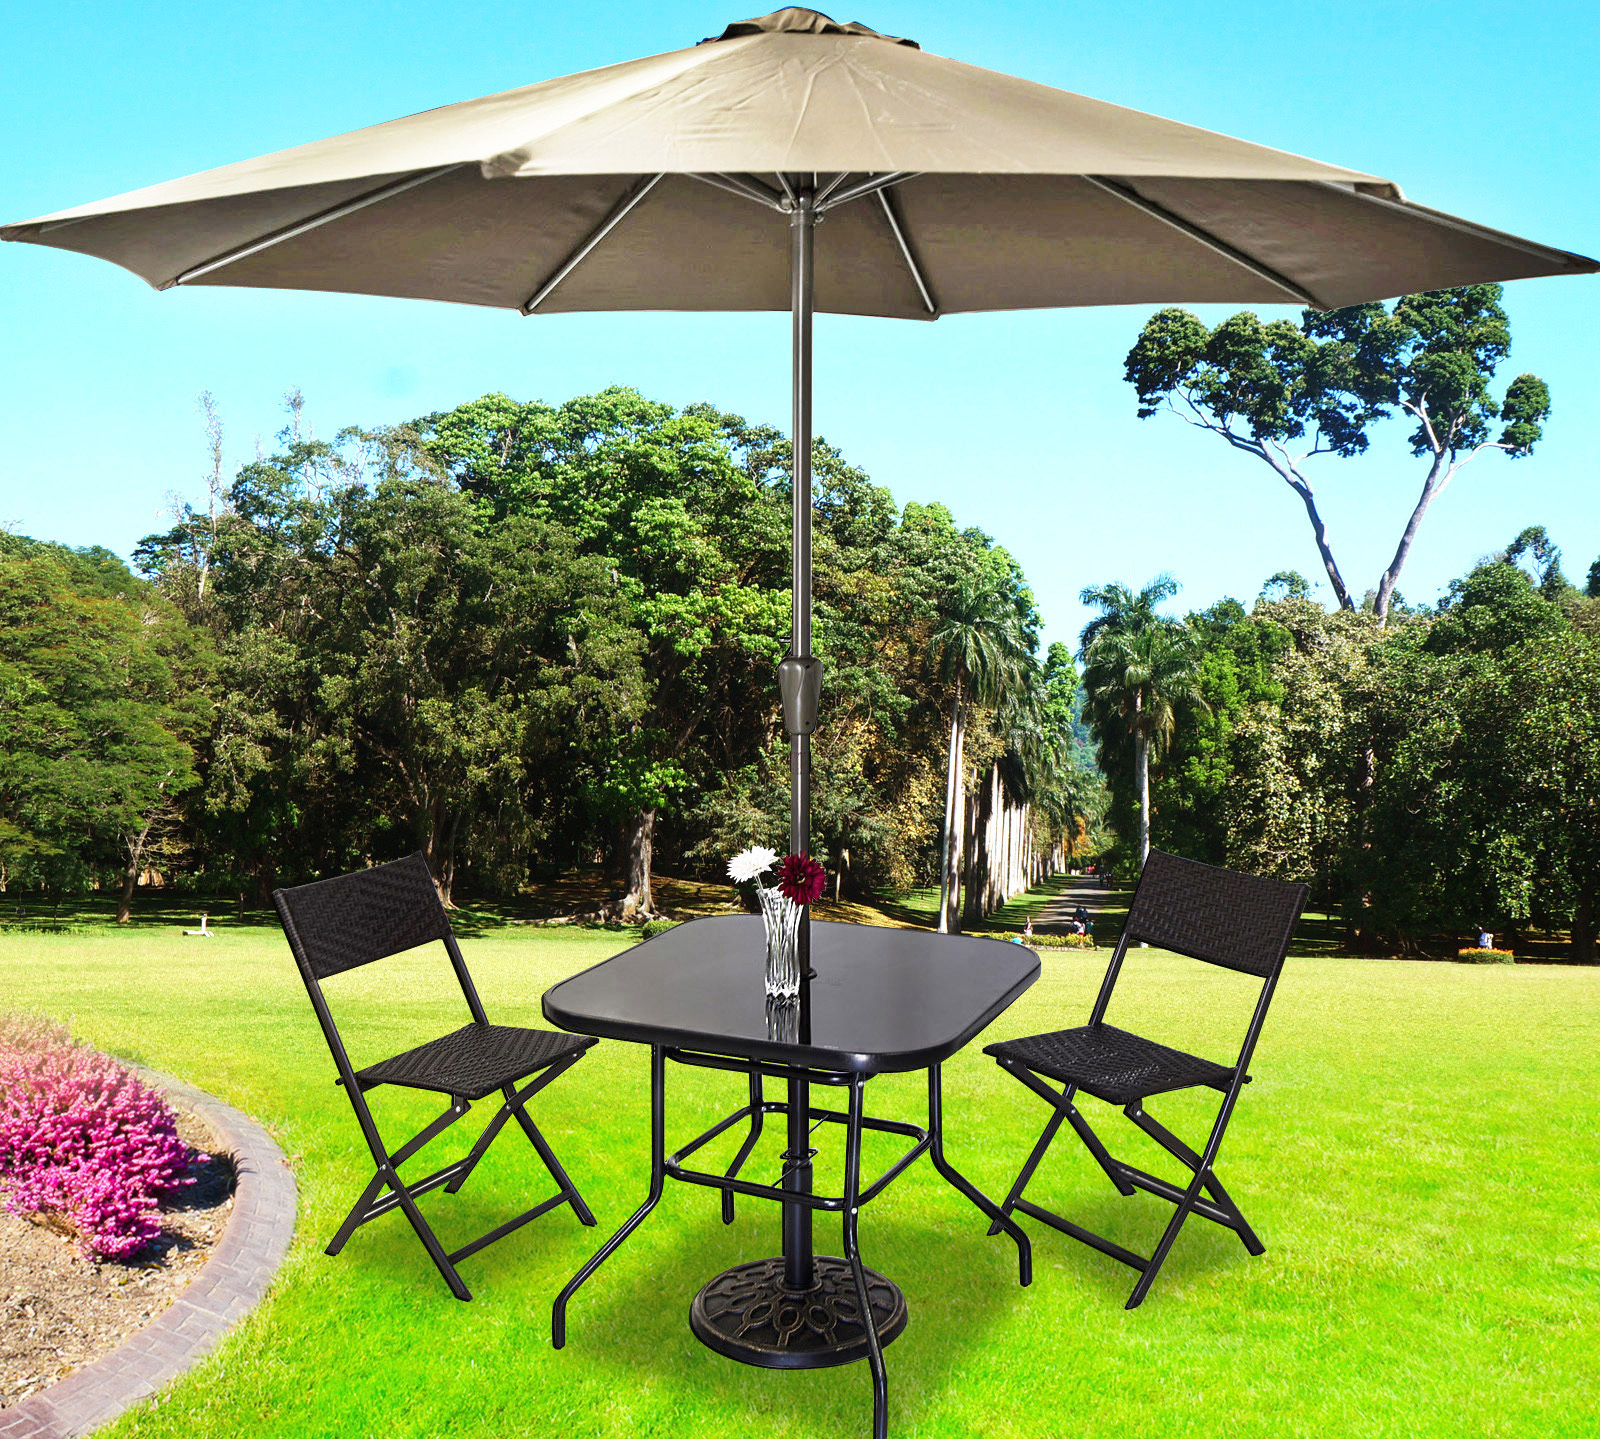 Alfresco 5PC Outdoor Setting (Beige Umbrella & Stand, 2 Rattan Chairs, Square Table)